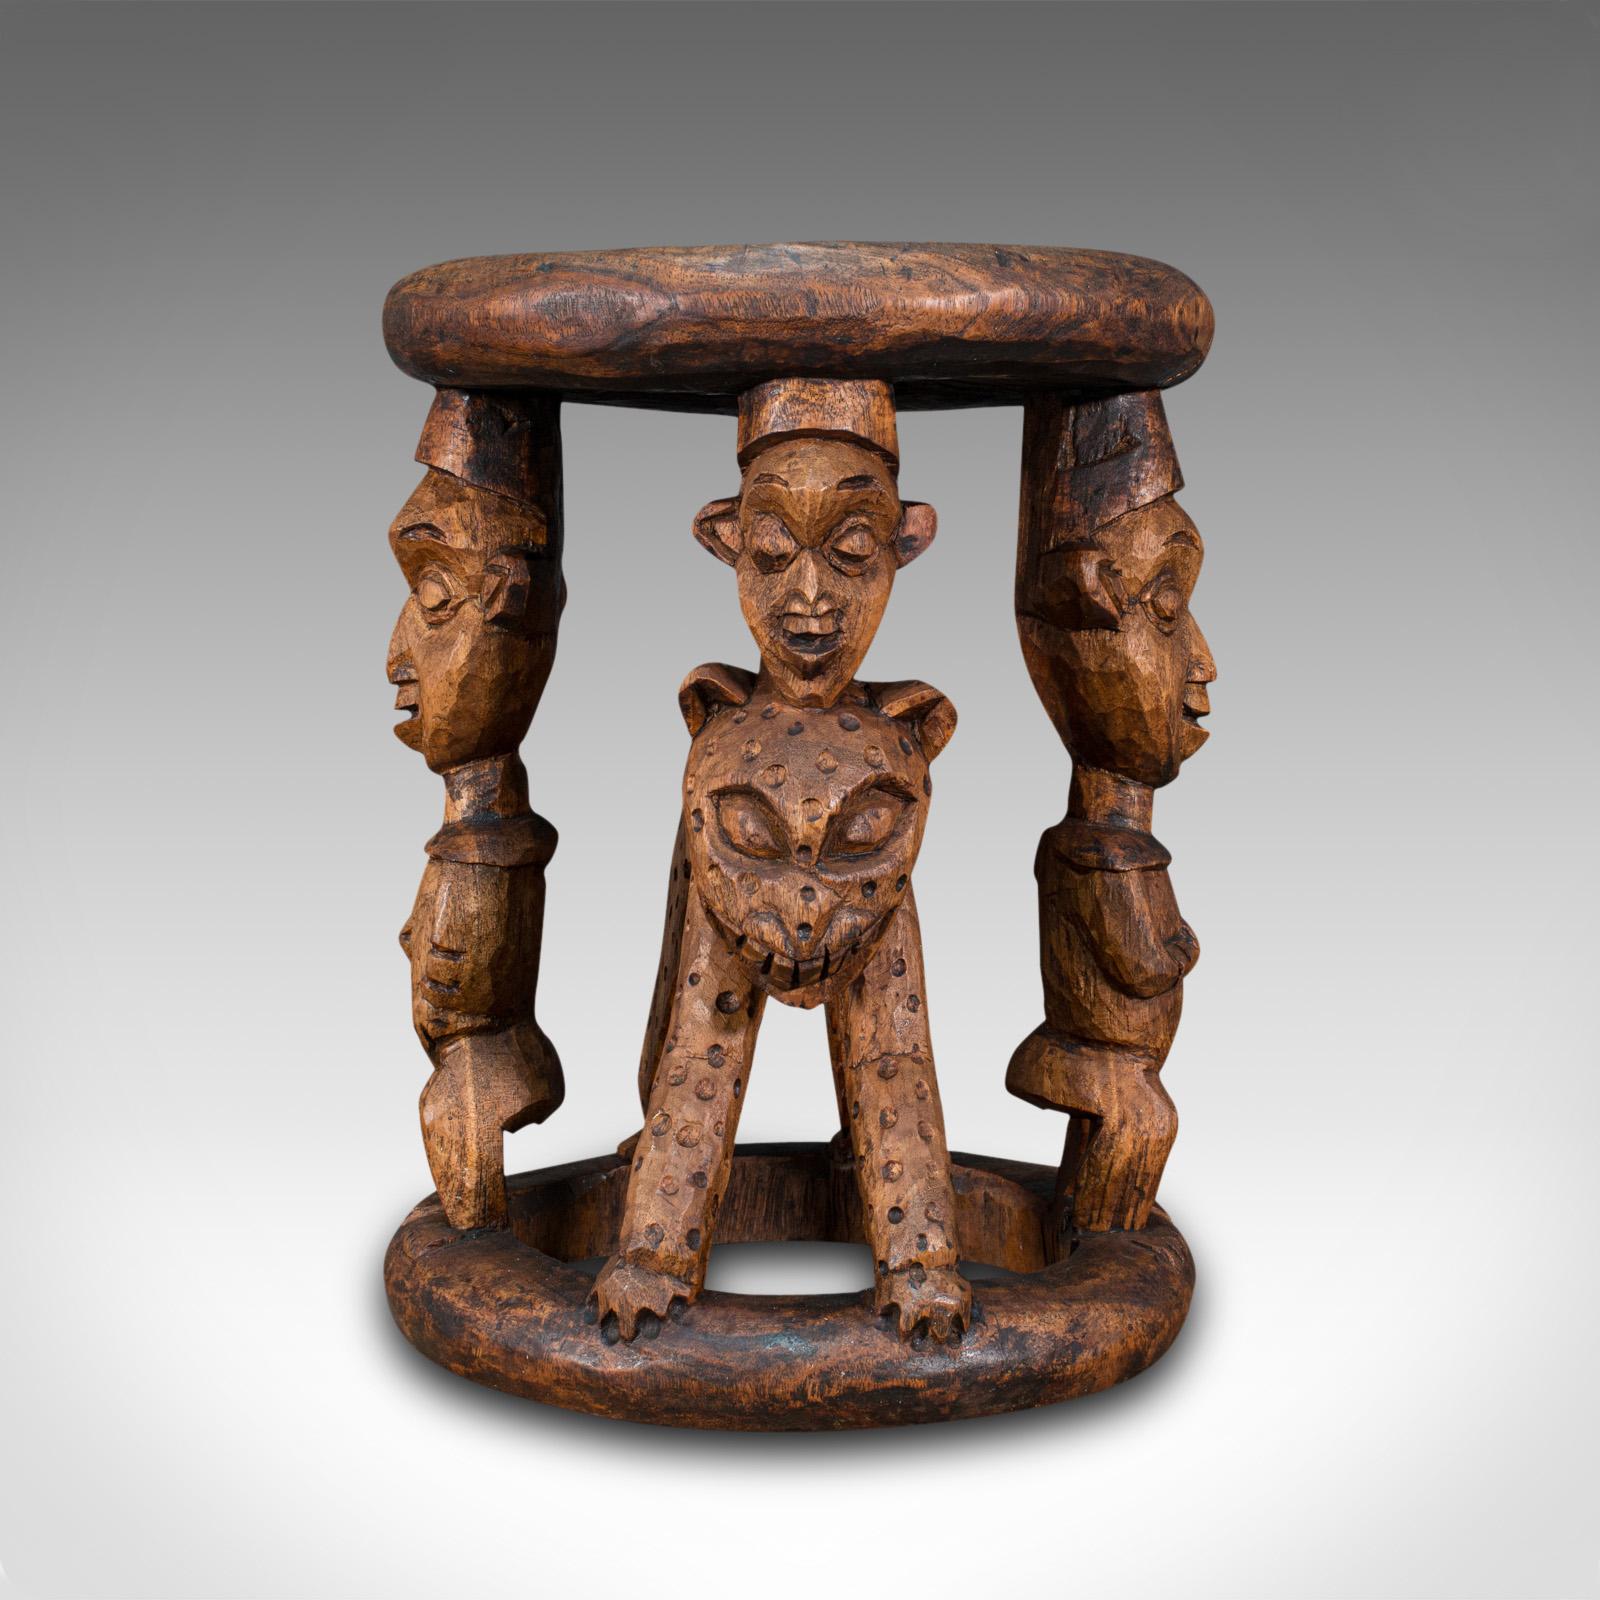 This is an antique Yoruba chief's stool. A West African, Benin Kingdom hardwood ceremonial lamp or side table, dating to the late 19th century, circa 1900.

Striking example of West African tribal craftsmanship
Displays a desirable aged patina -